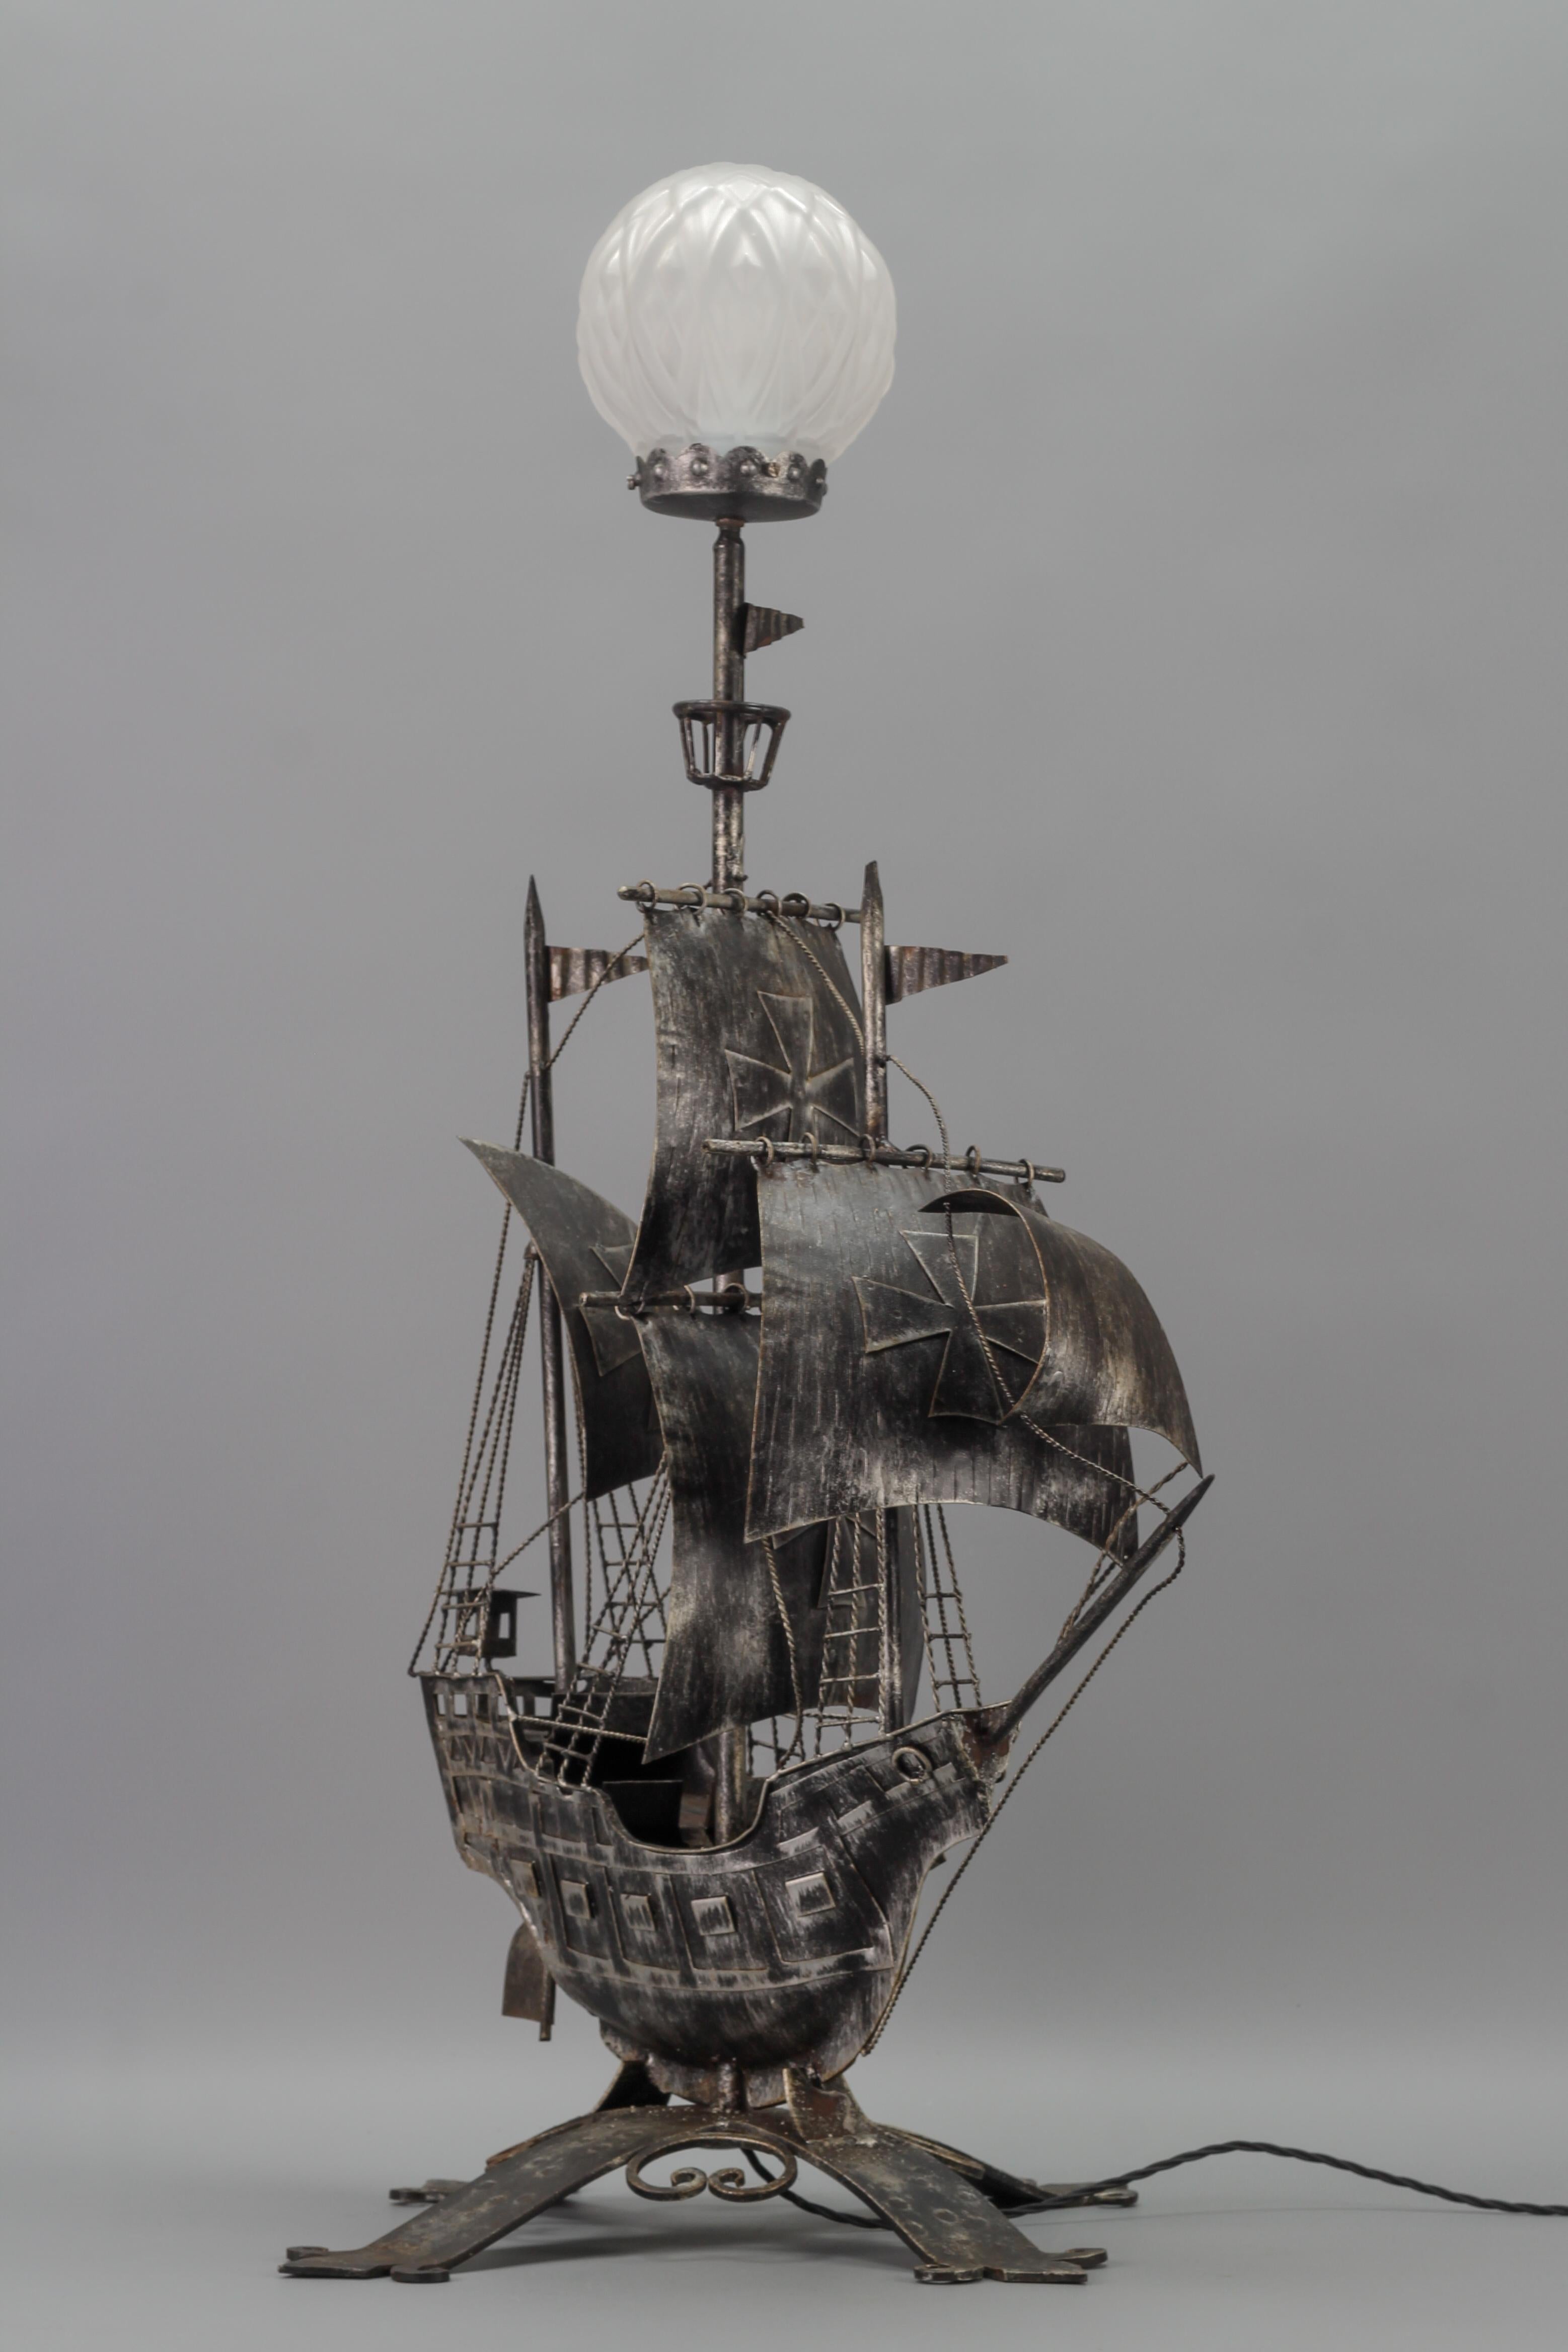 Wrought Iron and Glass Spanish Galleon Sailing Ship Shaped Floor Lamp, 1950s For Sale 1